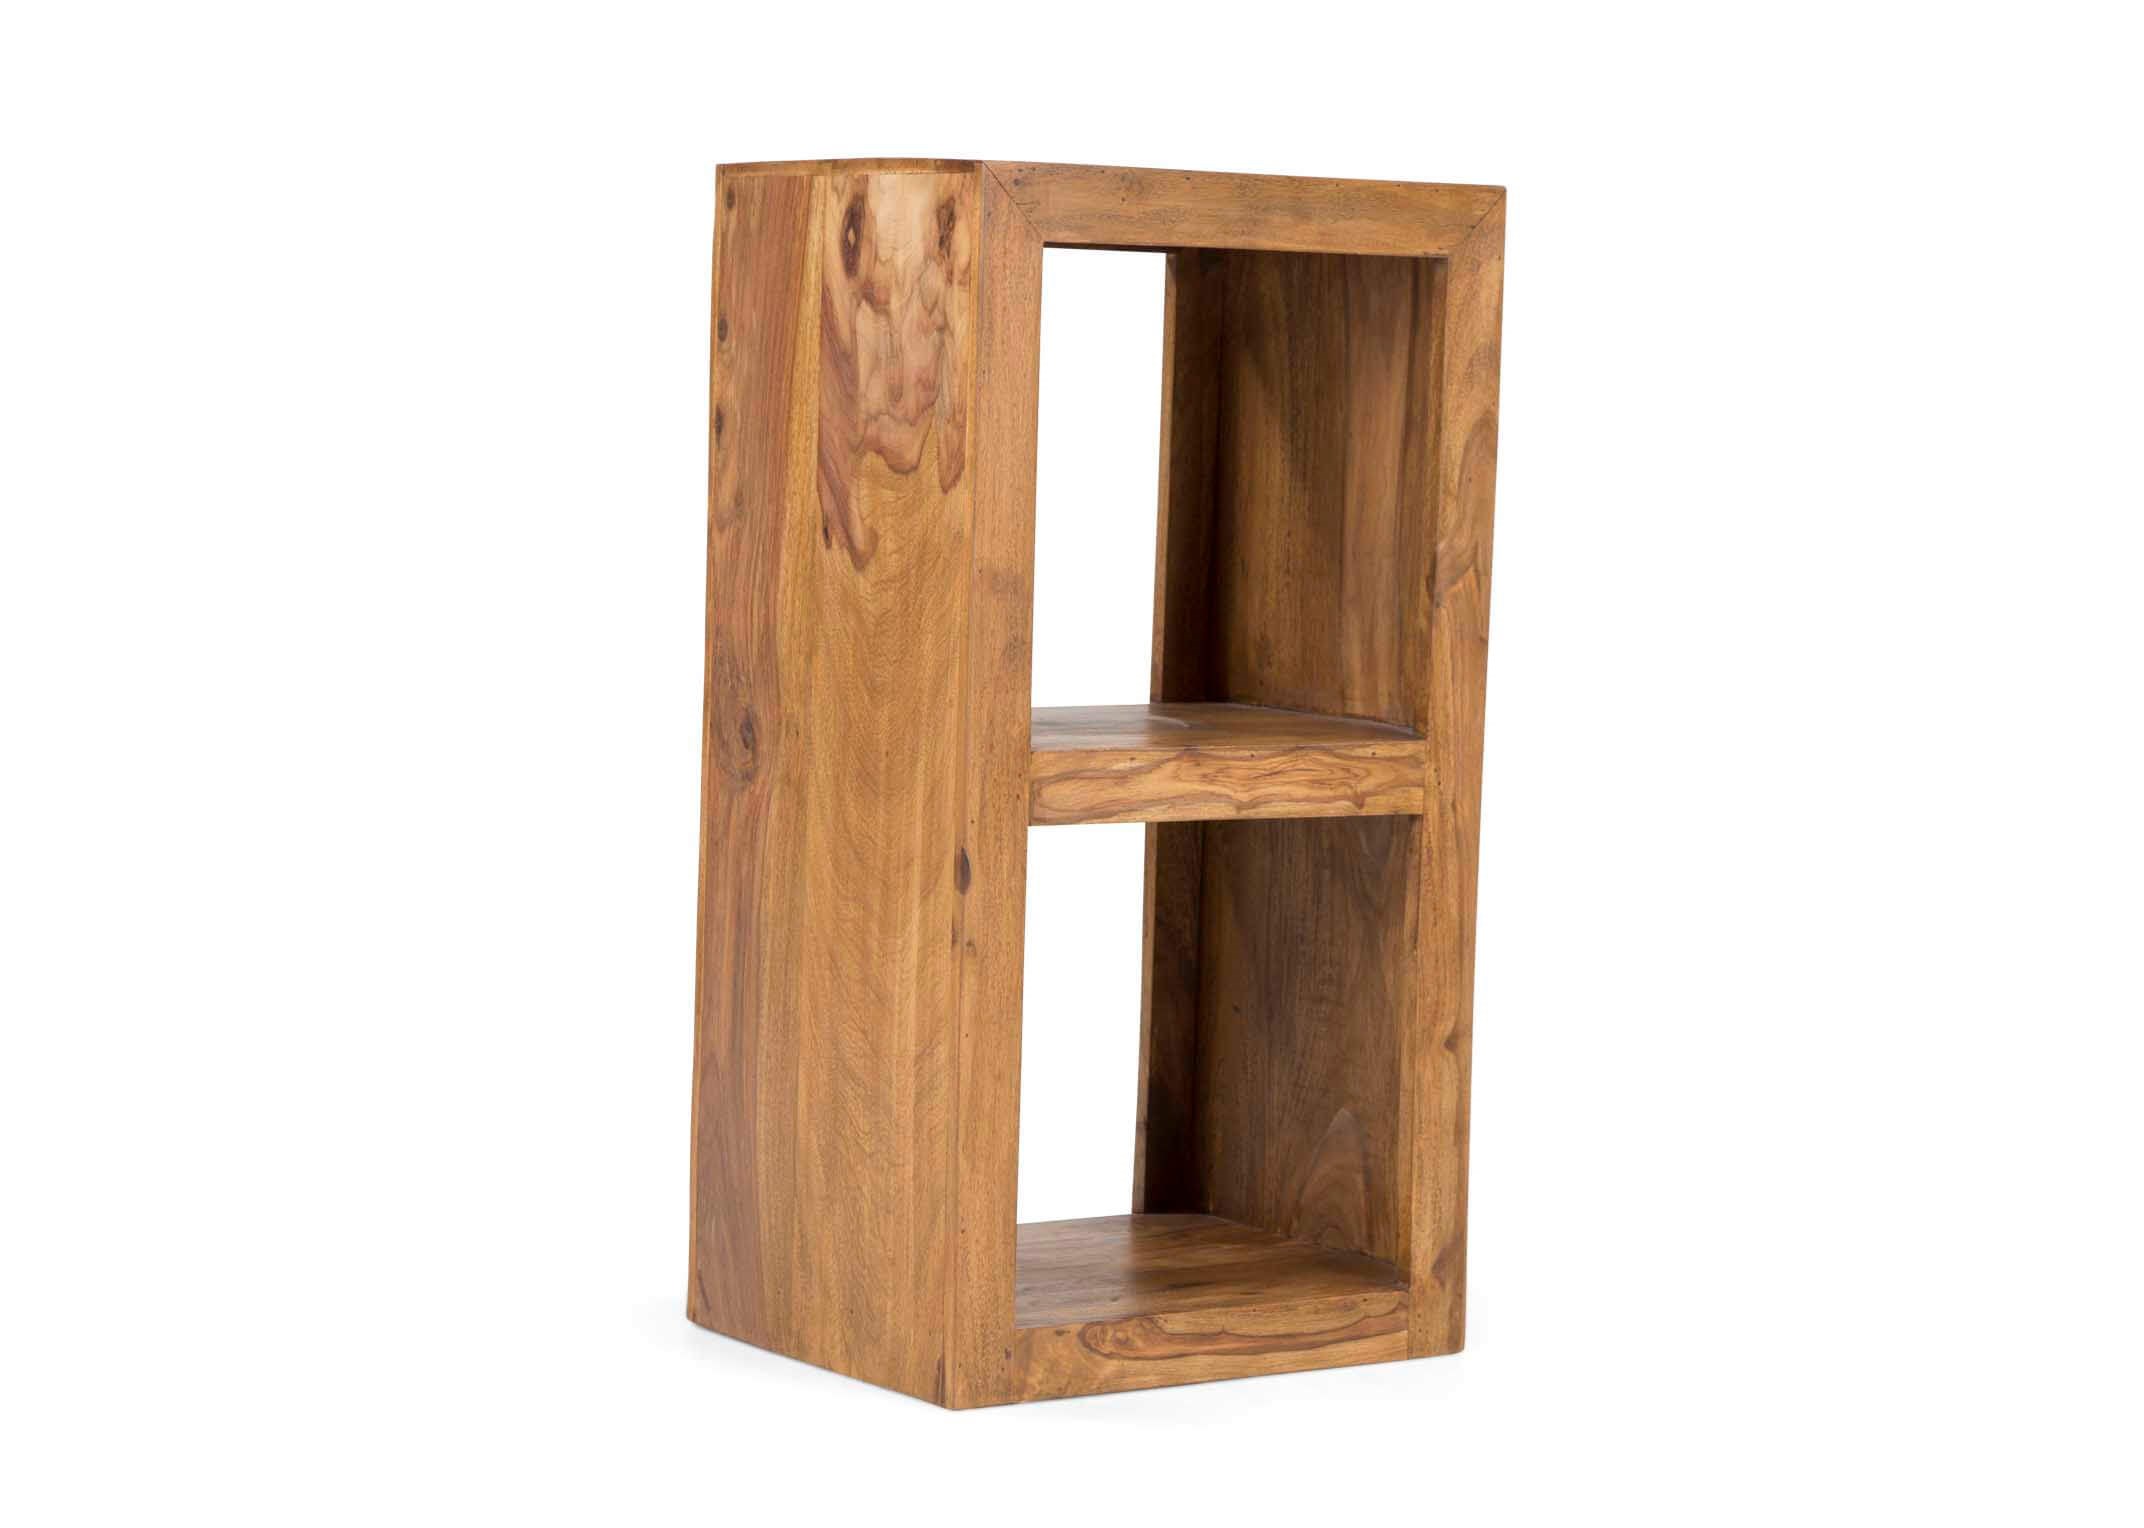 Two Section Wood Display Unit Cube, Atlas Sheesham Wood Bookcase